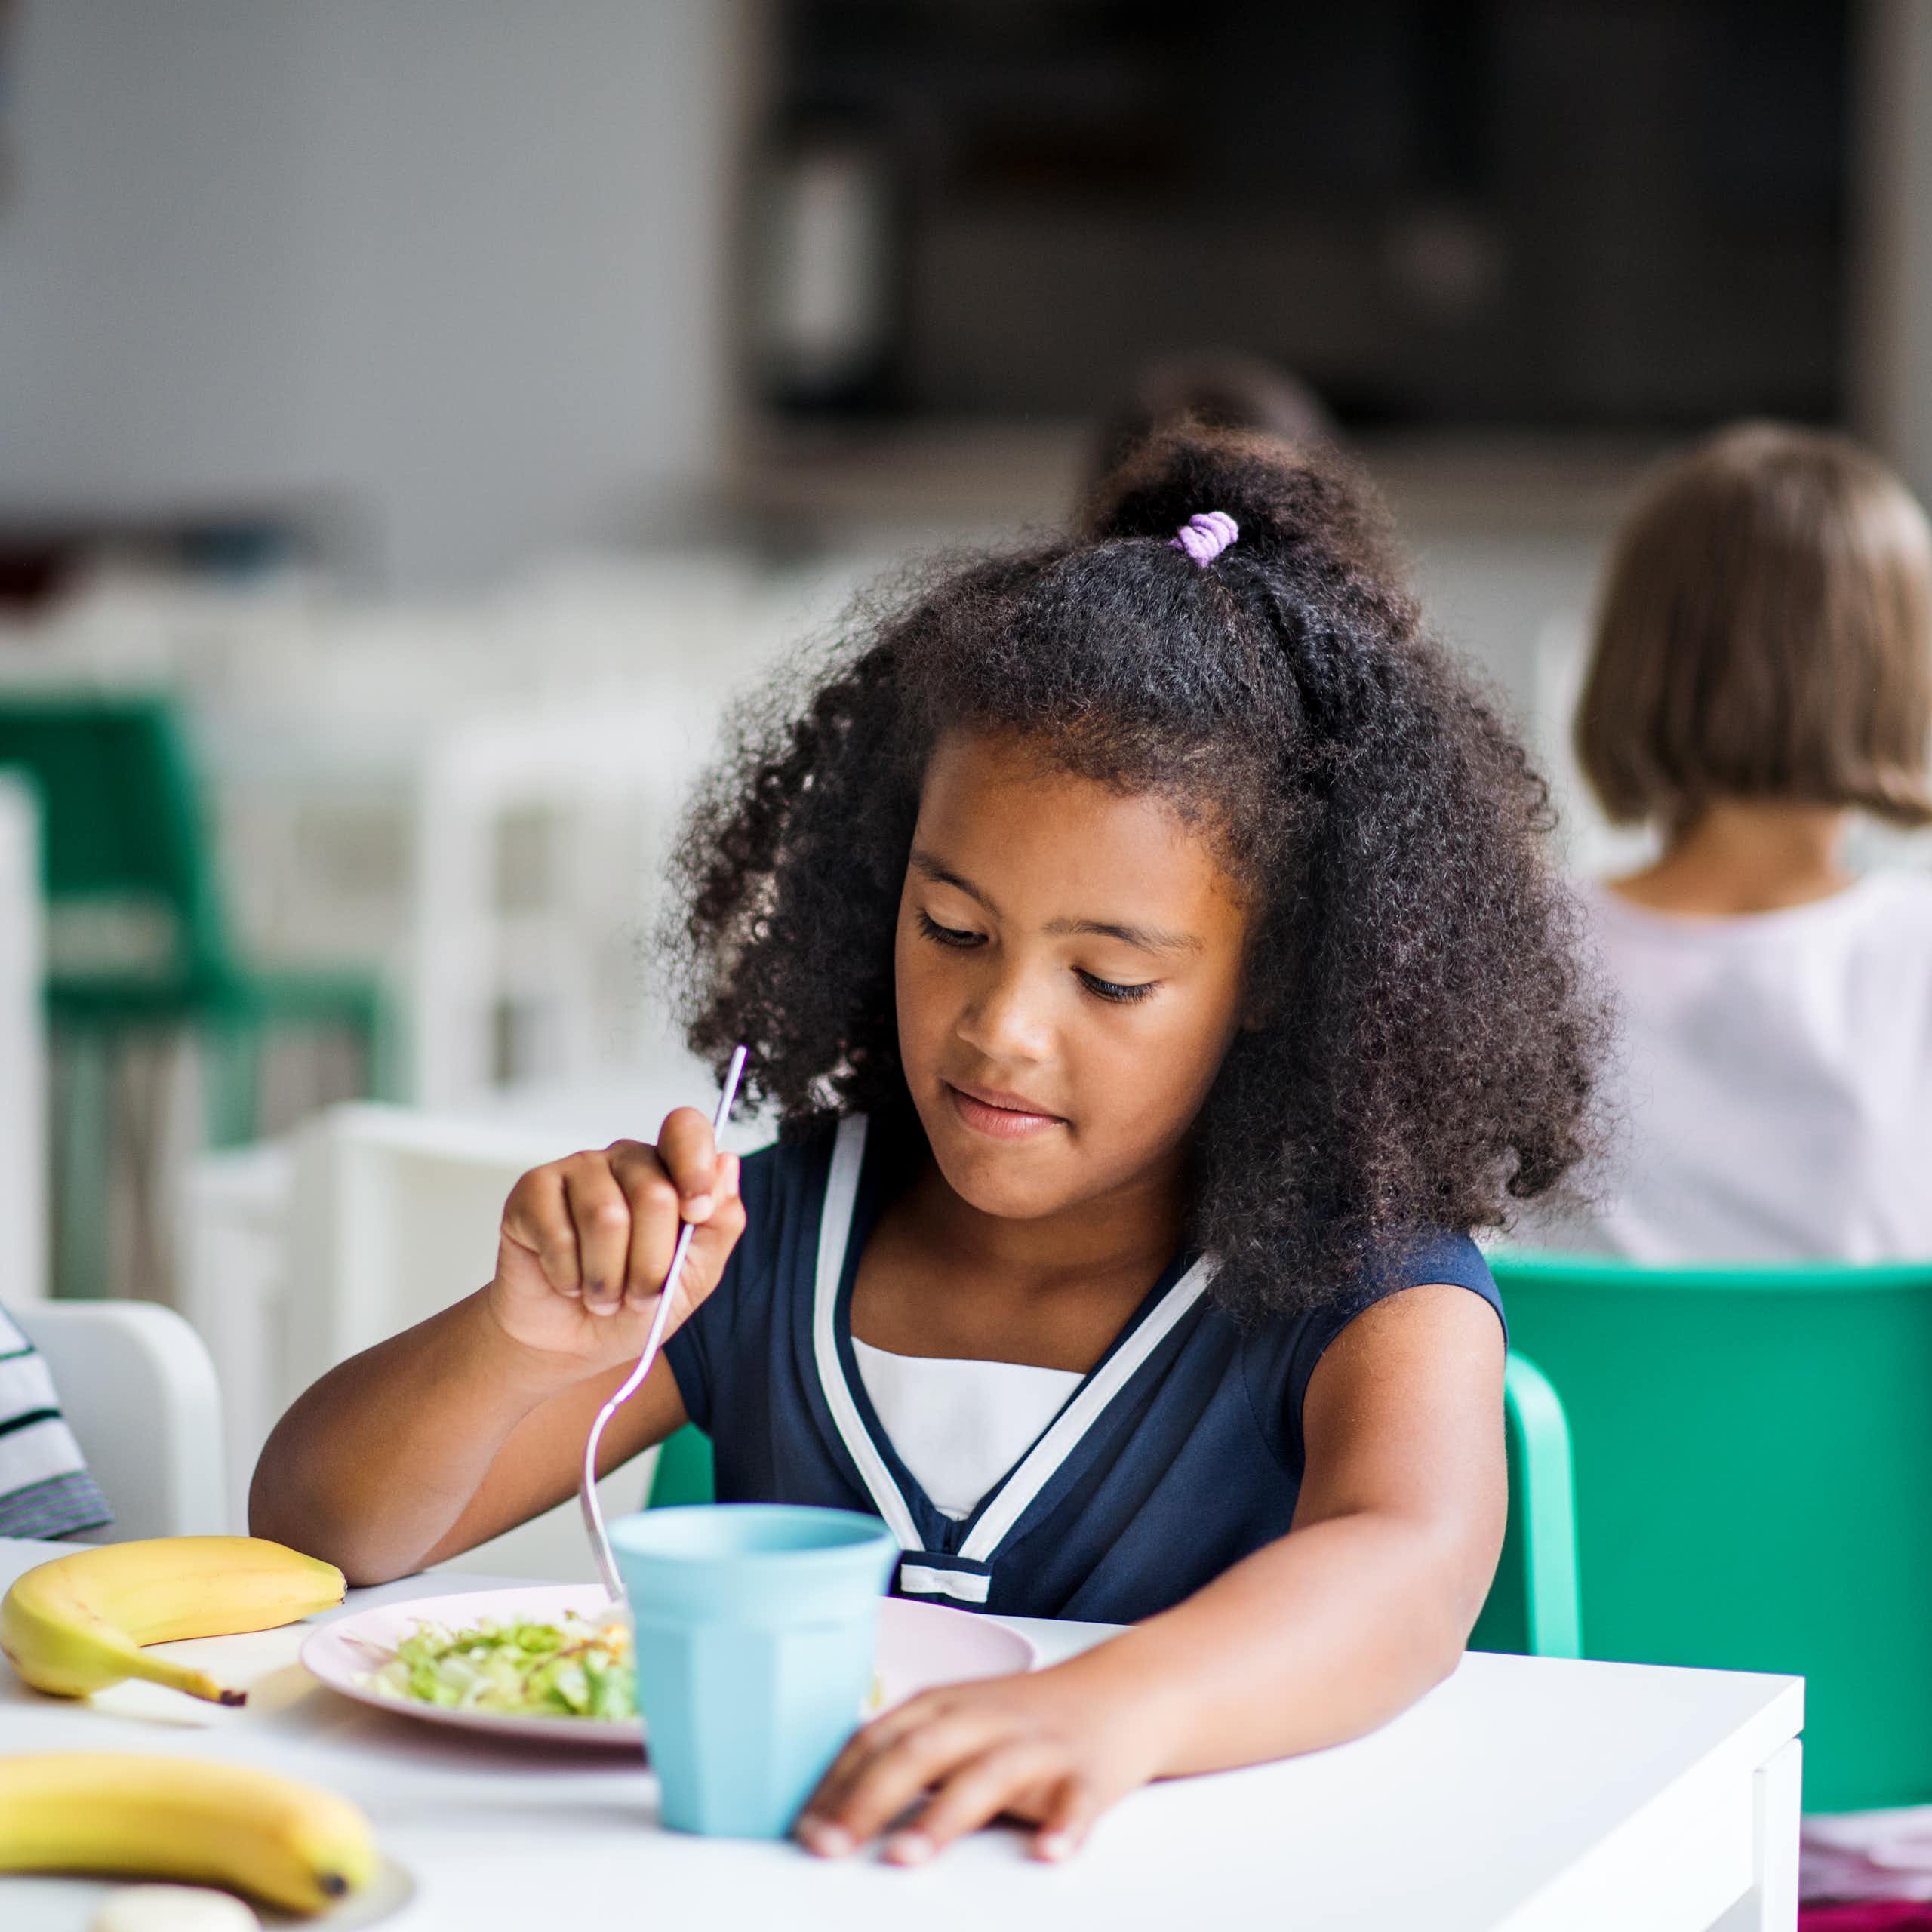 A child eats food off a plate in a classroom